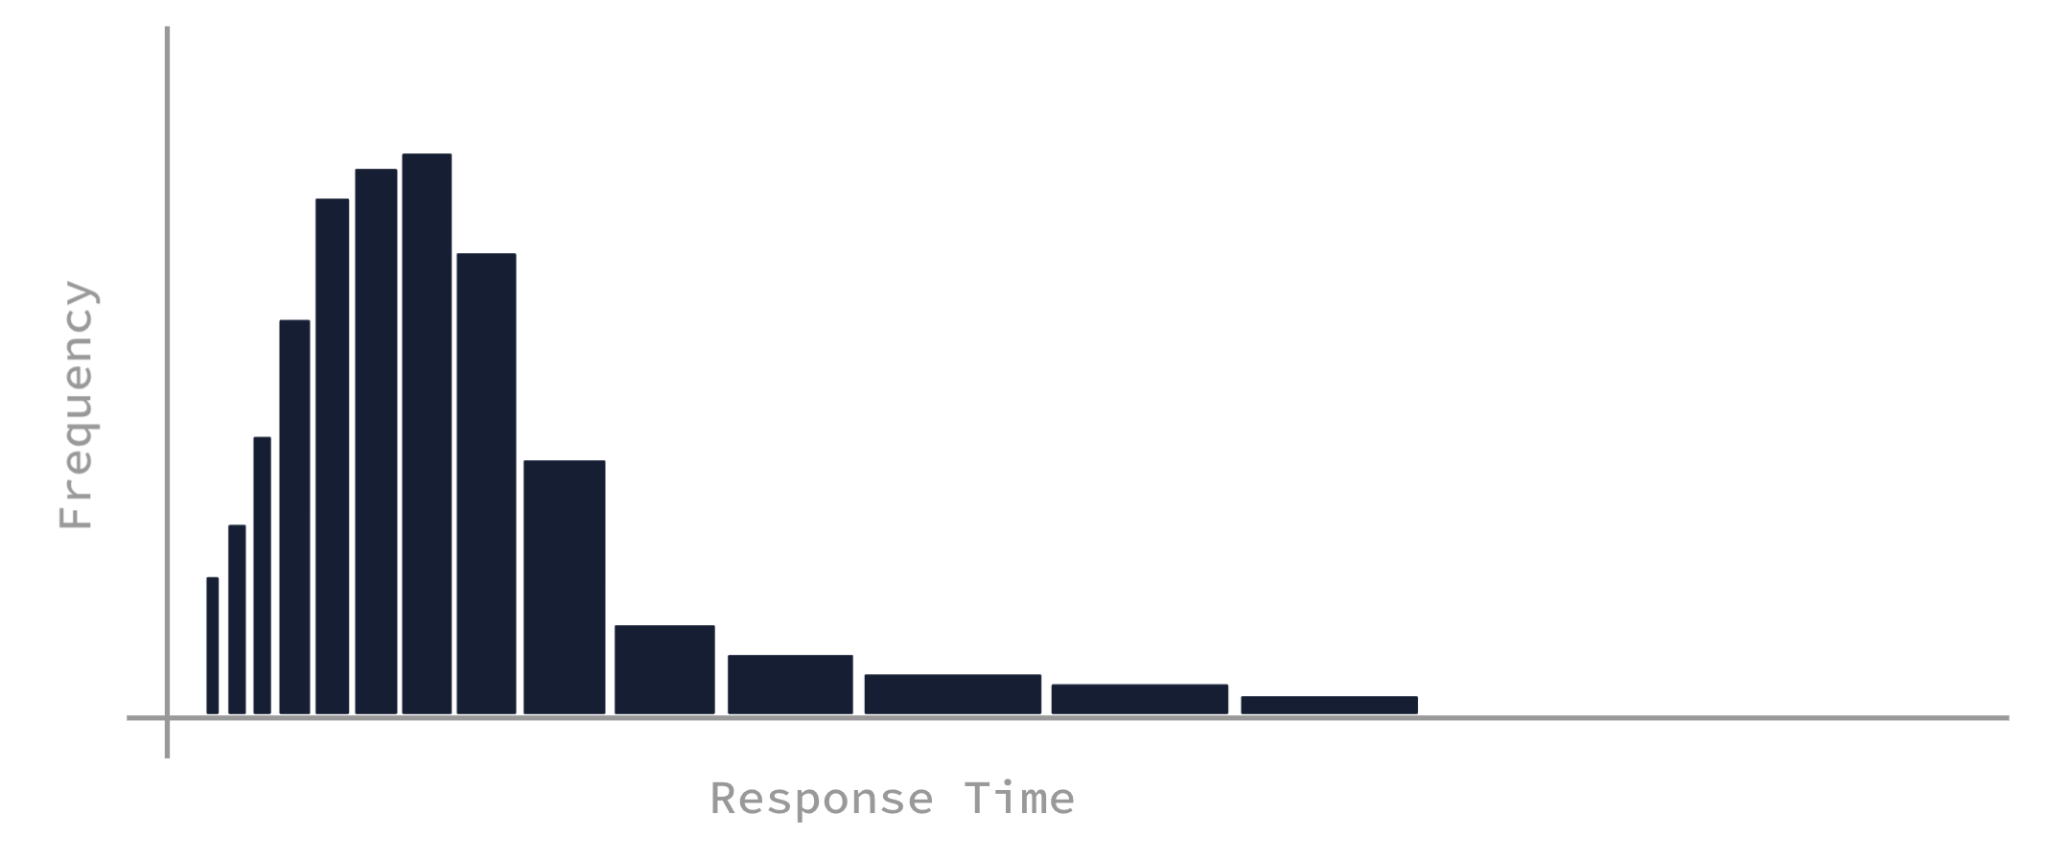 A graph similar to the last one except the black boxes start smaller than the previous ones and increase in width as you move to the right.